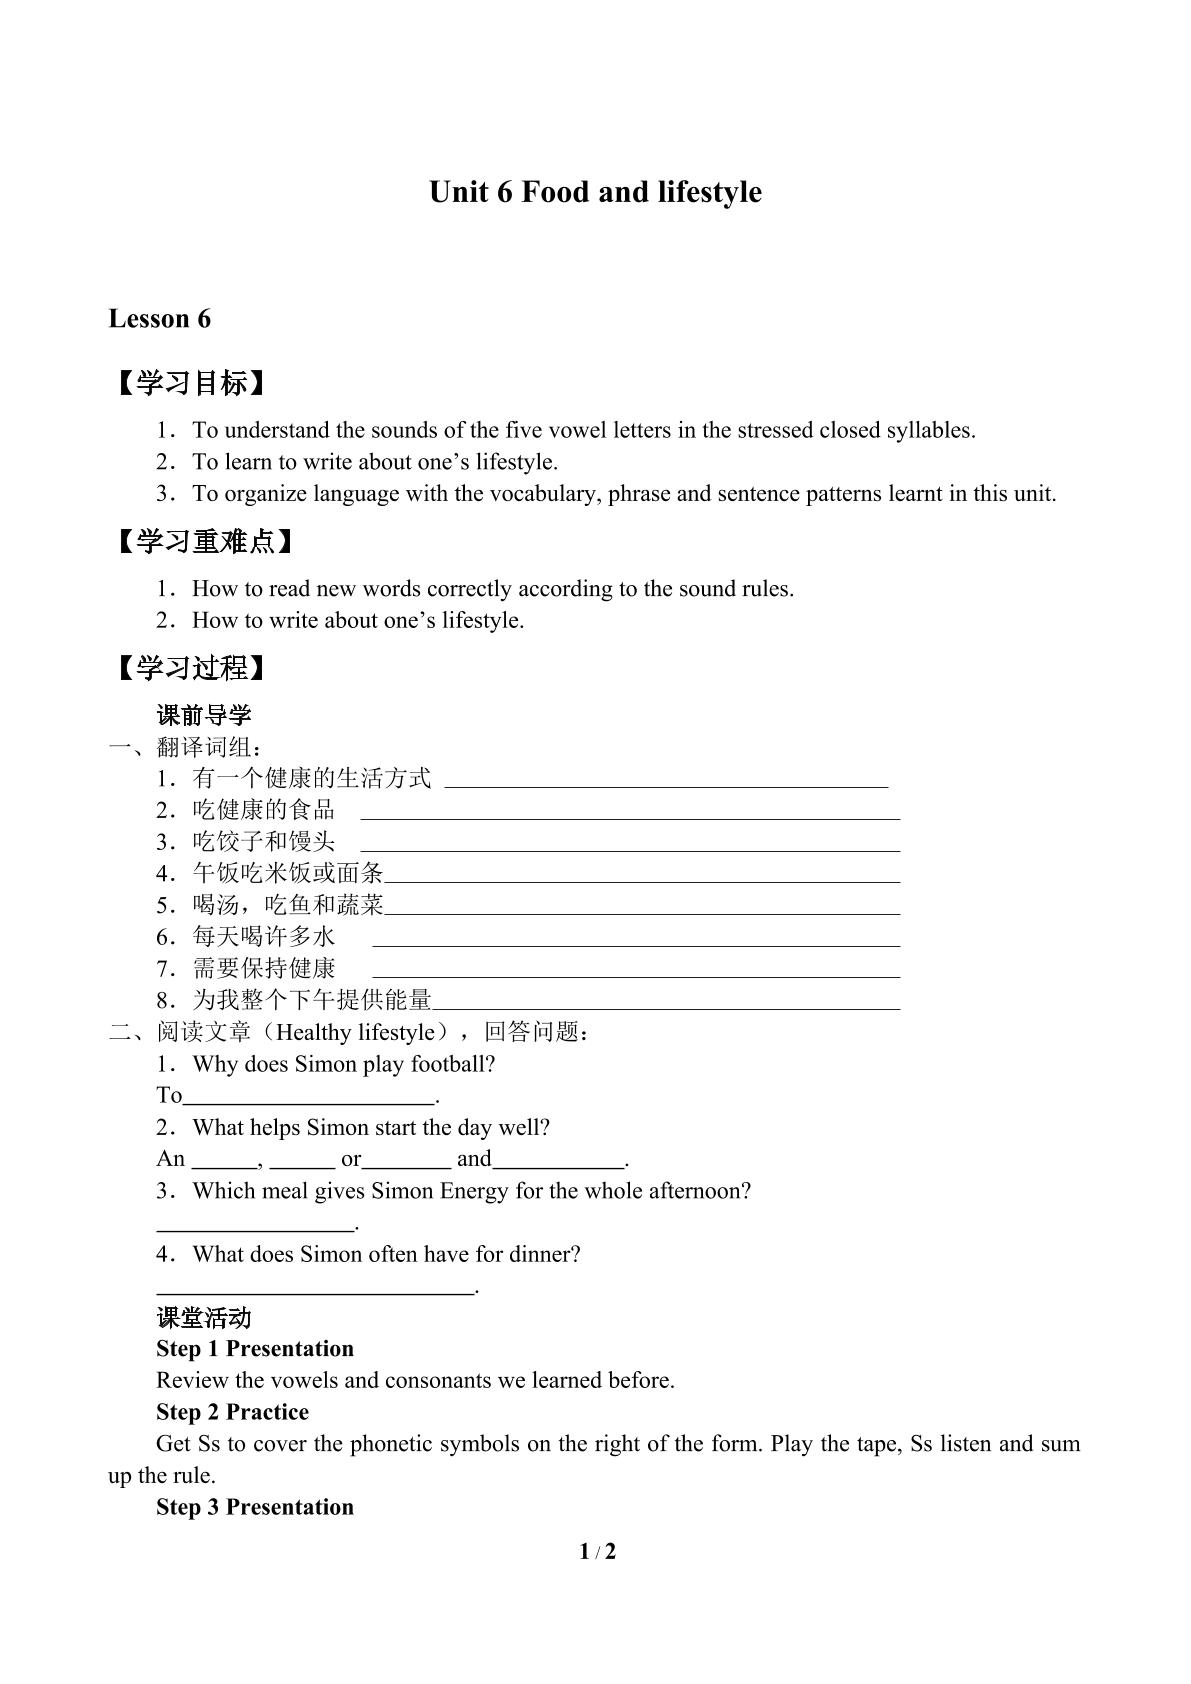 Unit 6 Food and lifestyle_学案6